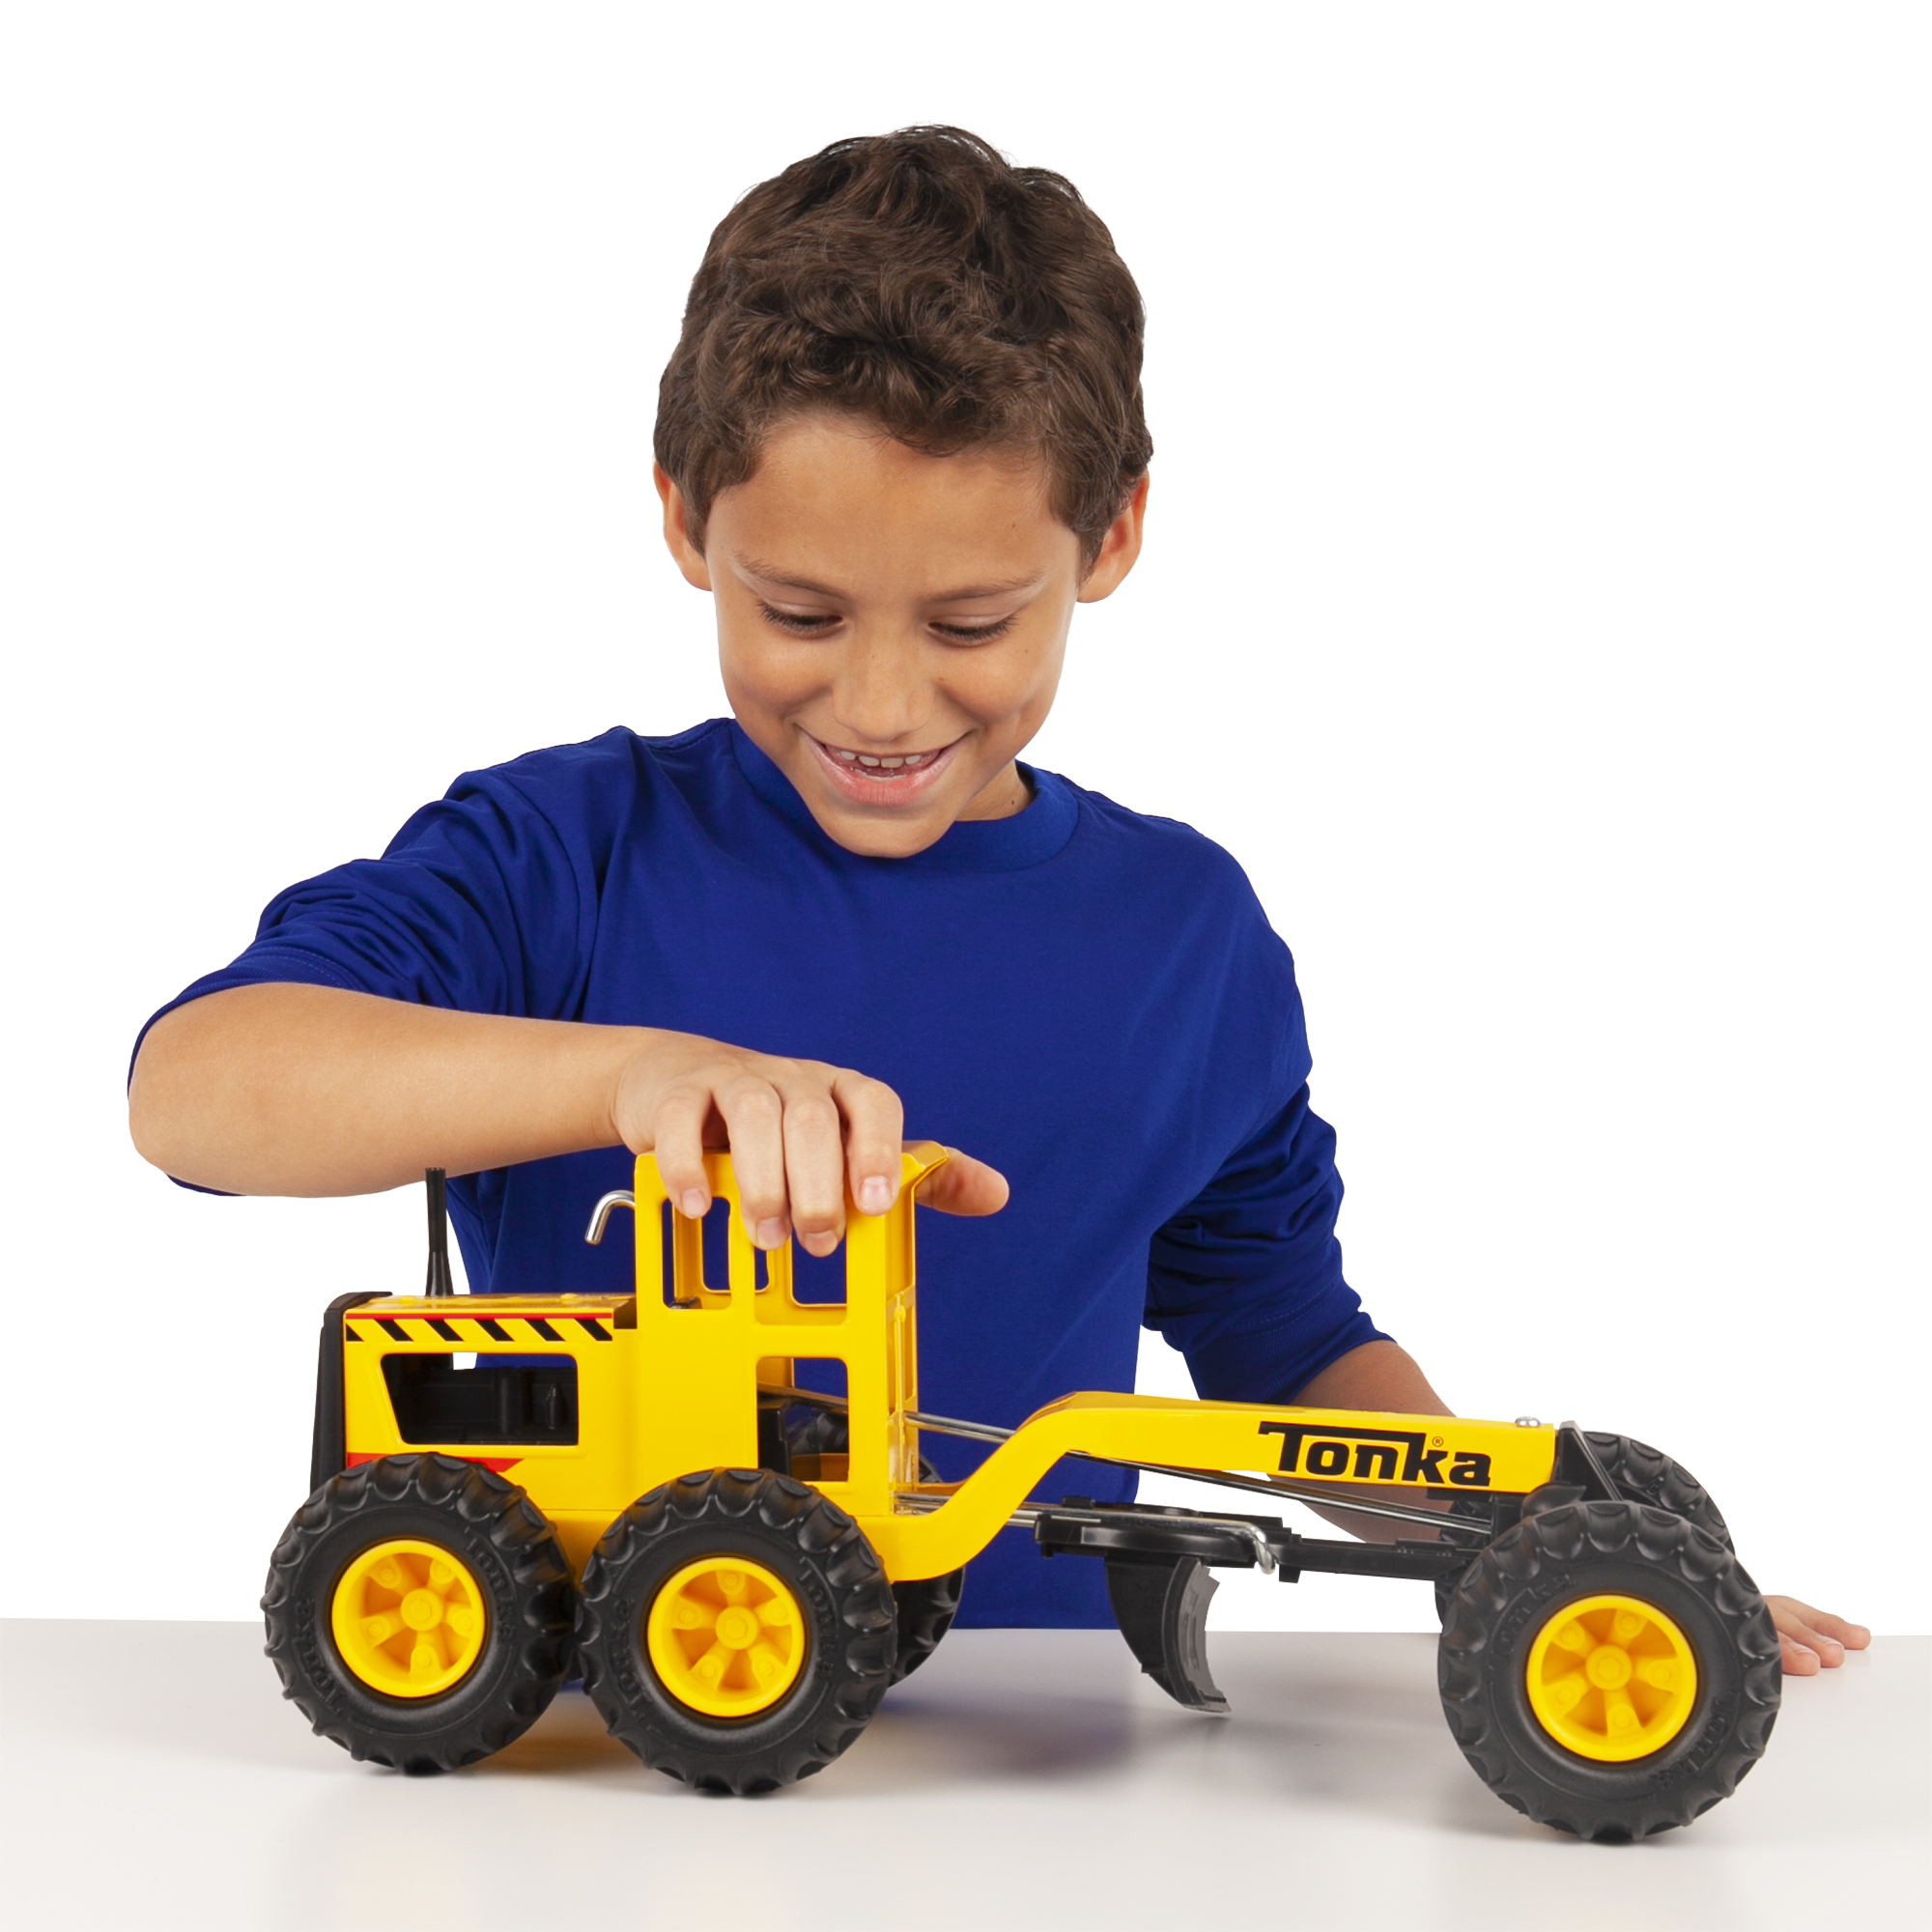 Tonka Steel Classics Road Grader, 17" Long, Moveable Blade & Lever Axle Steering, Toy Vehicle, Toy Truck, Realistic & Creative Construction Play, Great Gift, Kids Ages 3+ - image 4 of 6